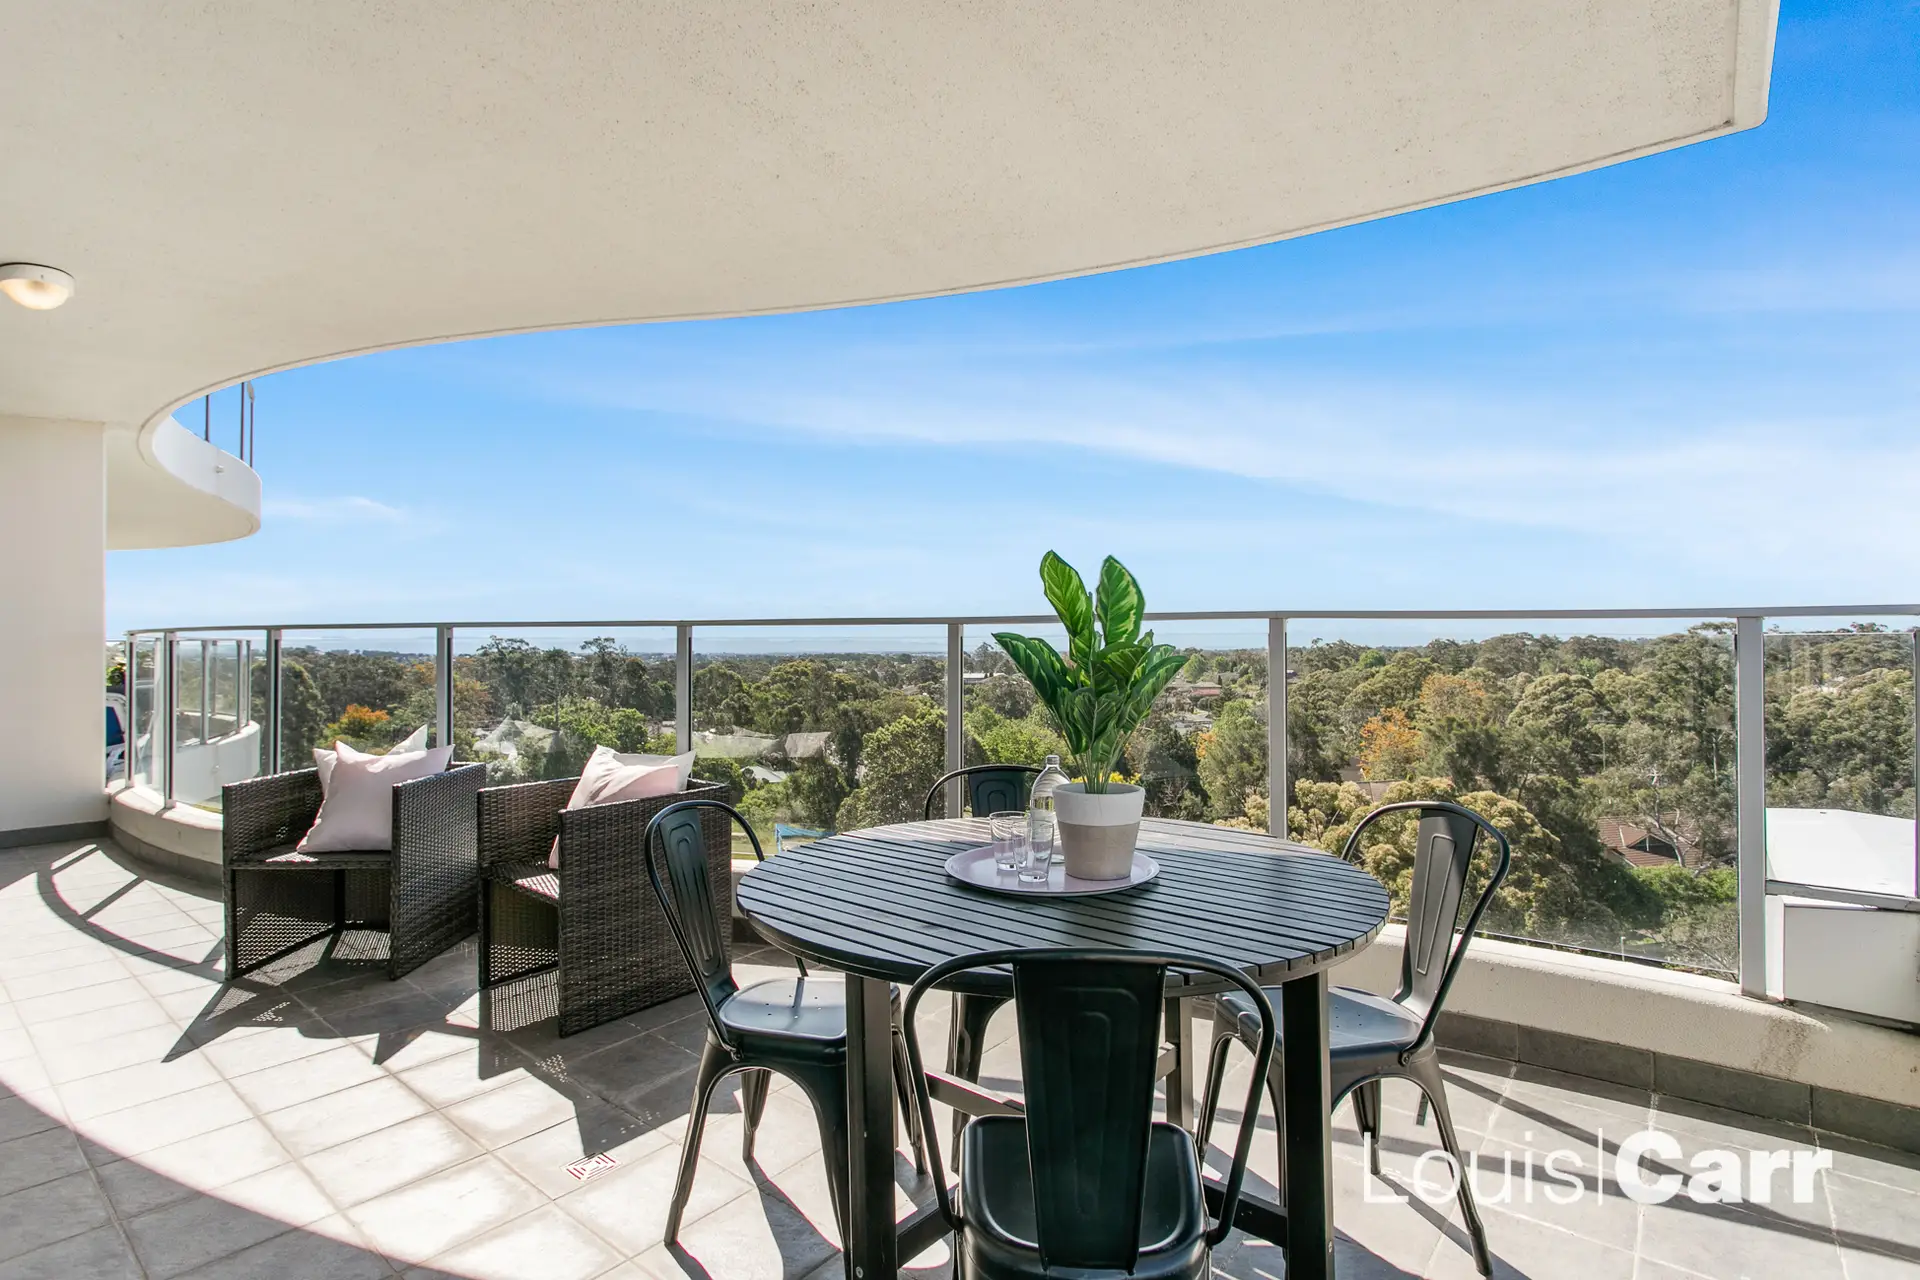 Photo #4: 707/12 Pennant Street, Castle Hill - Sold by Louis Carr Real Estate